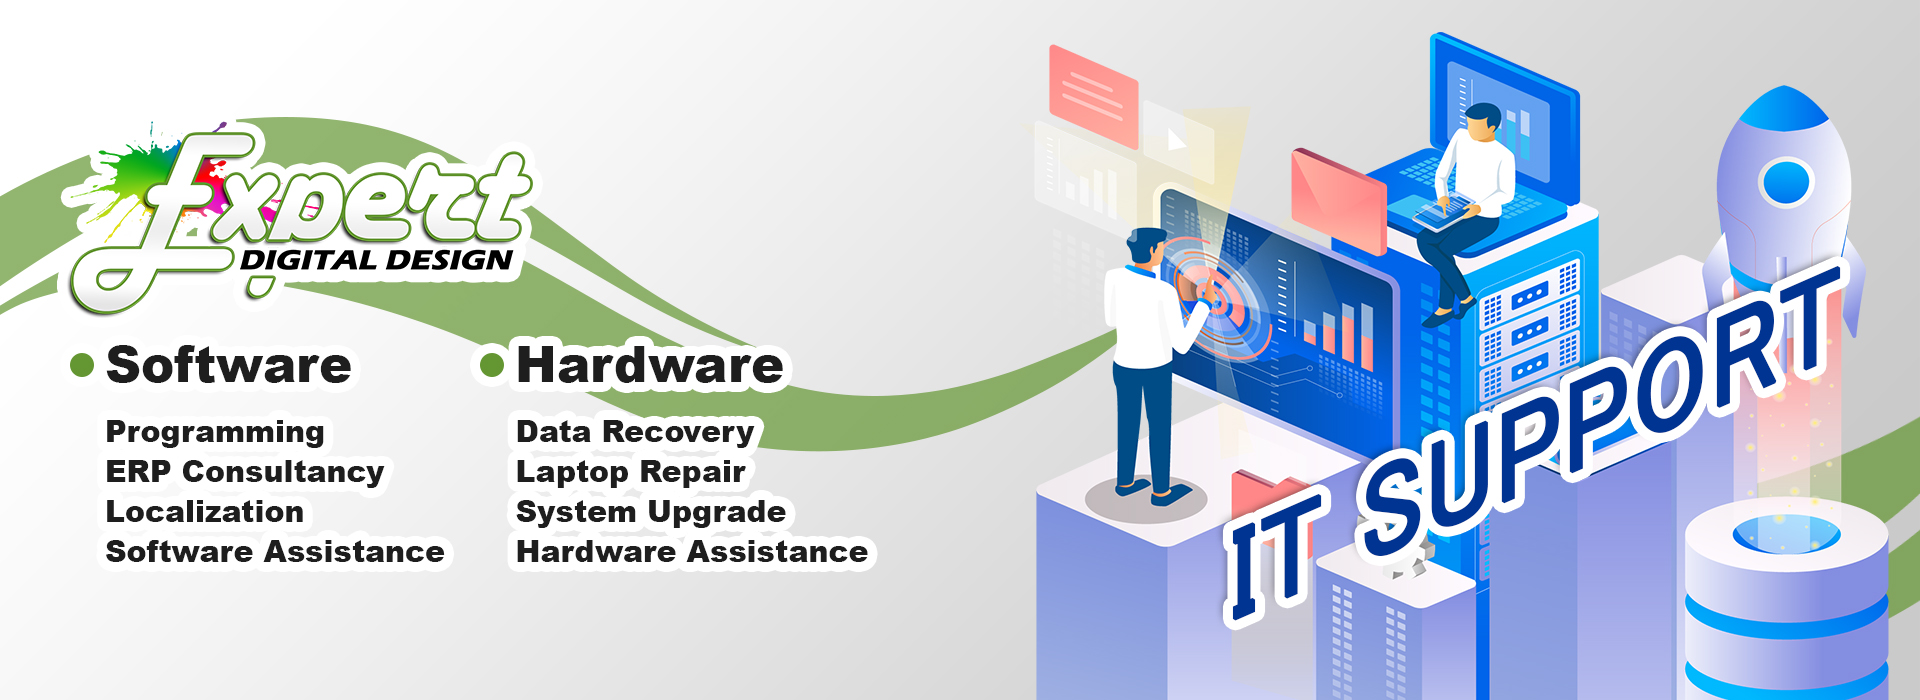 Expert Digital Design IT Support business service offers Software, Hardware, Programming, ERP Consultancy, Localization, Software Assistance, Data Recovery, Laptop Repair, System Upgrade, and Hardware Assistance